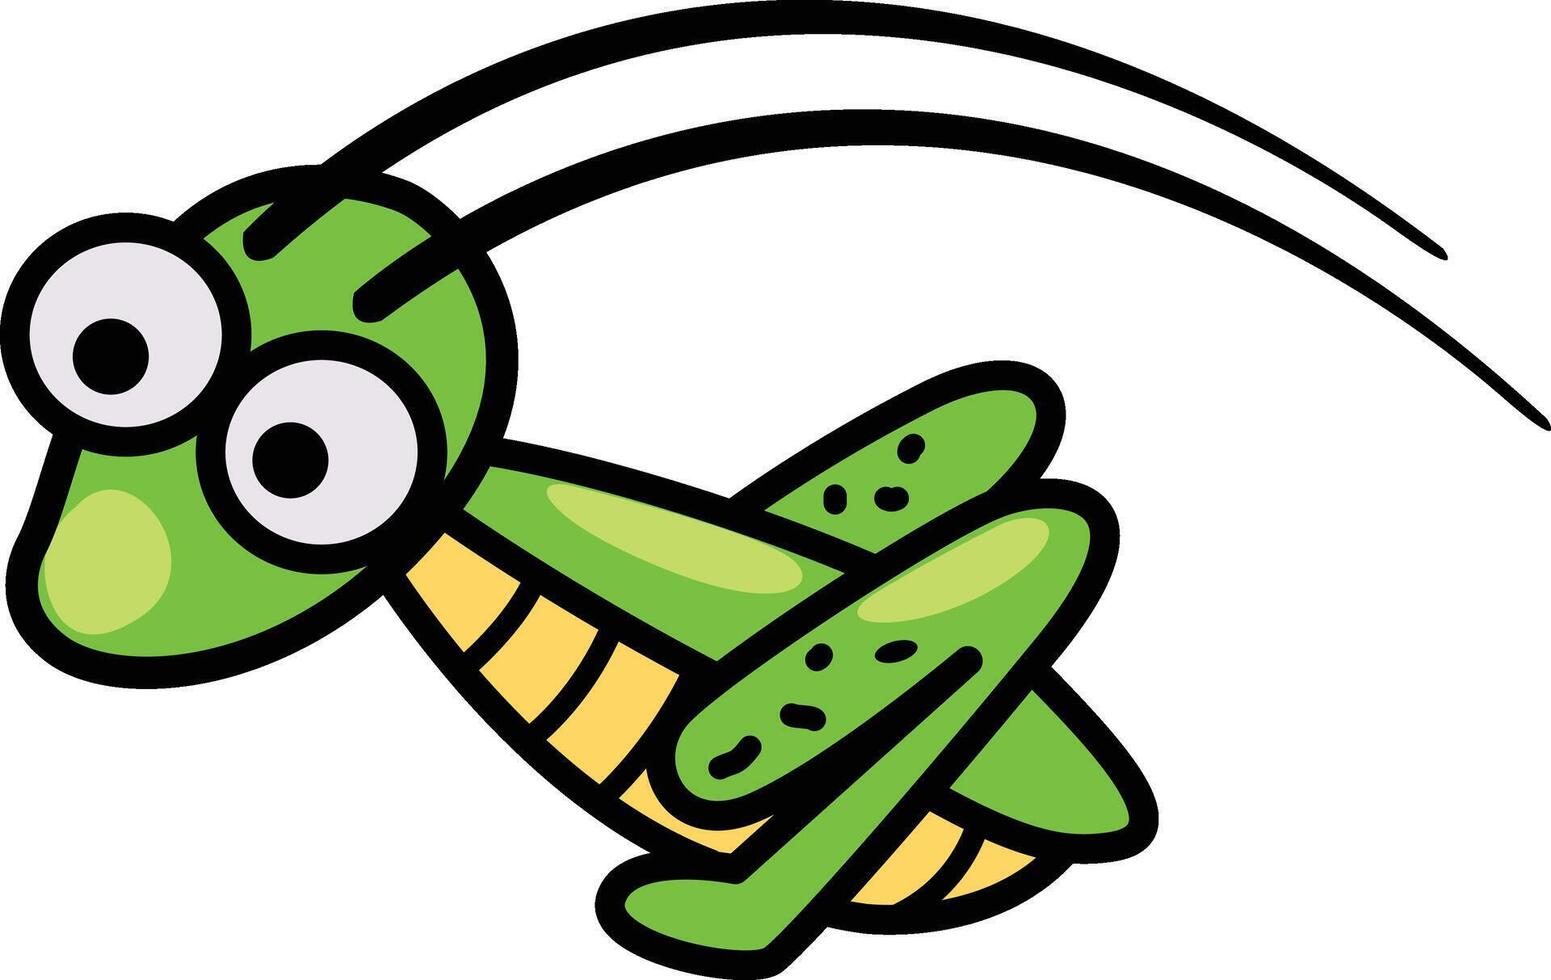 Hand drawn cricket insect character vector